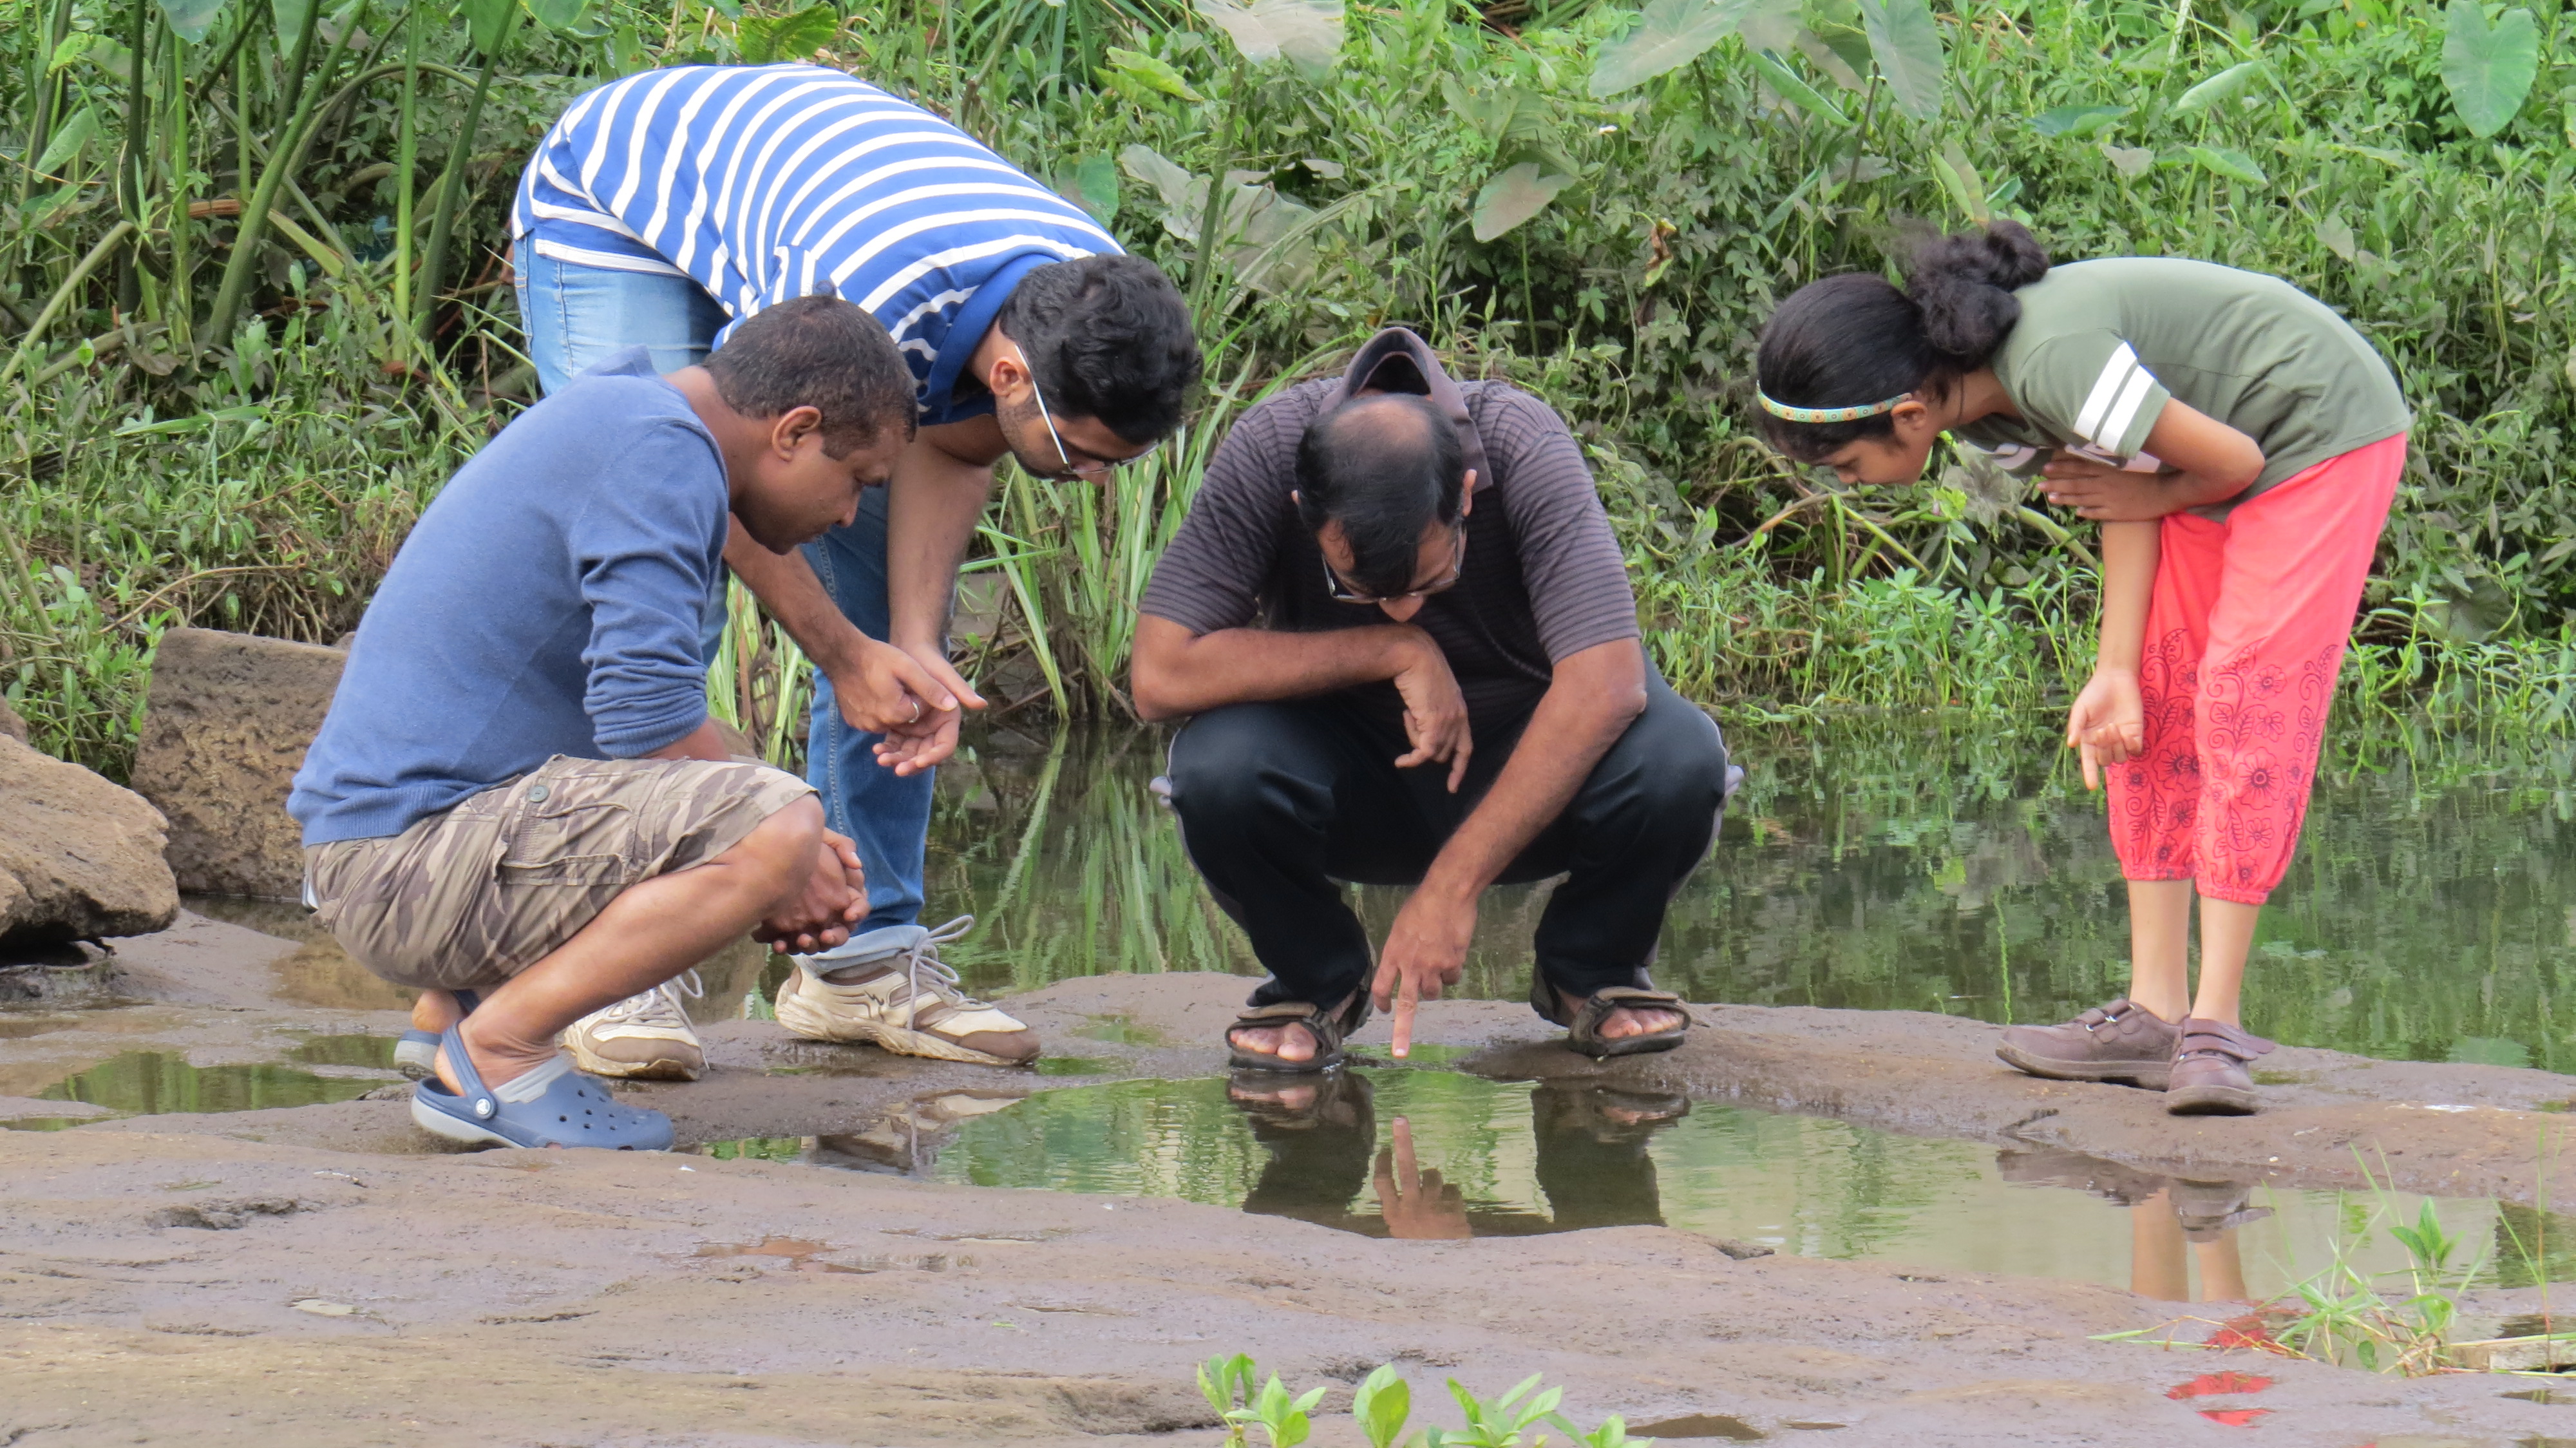 Identification of rock pool site through citizen participation by Jeevitnadi (Image Source: Jeevitnadi)